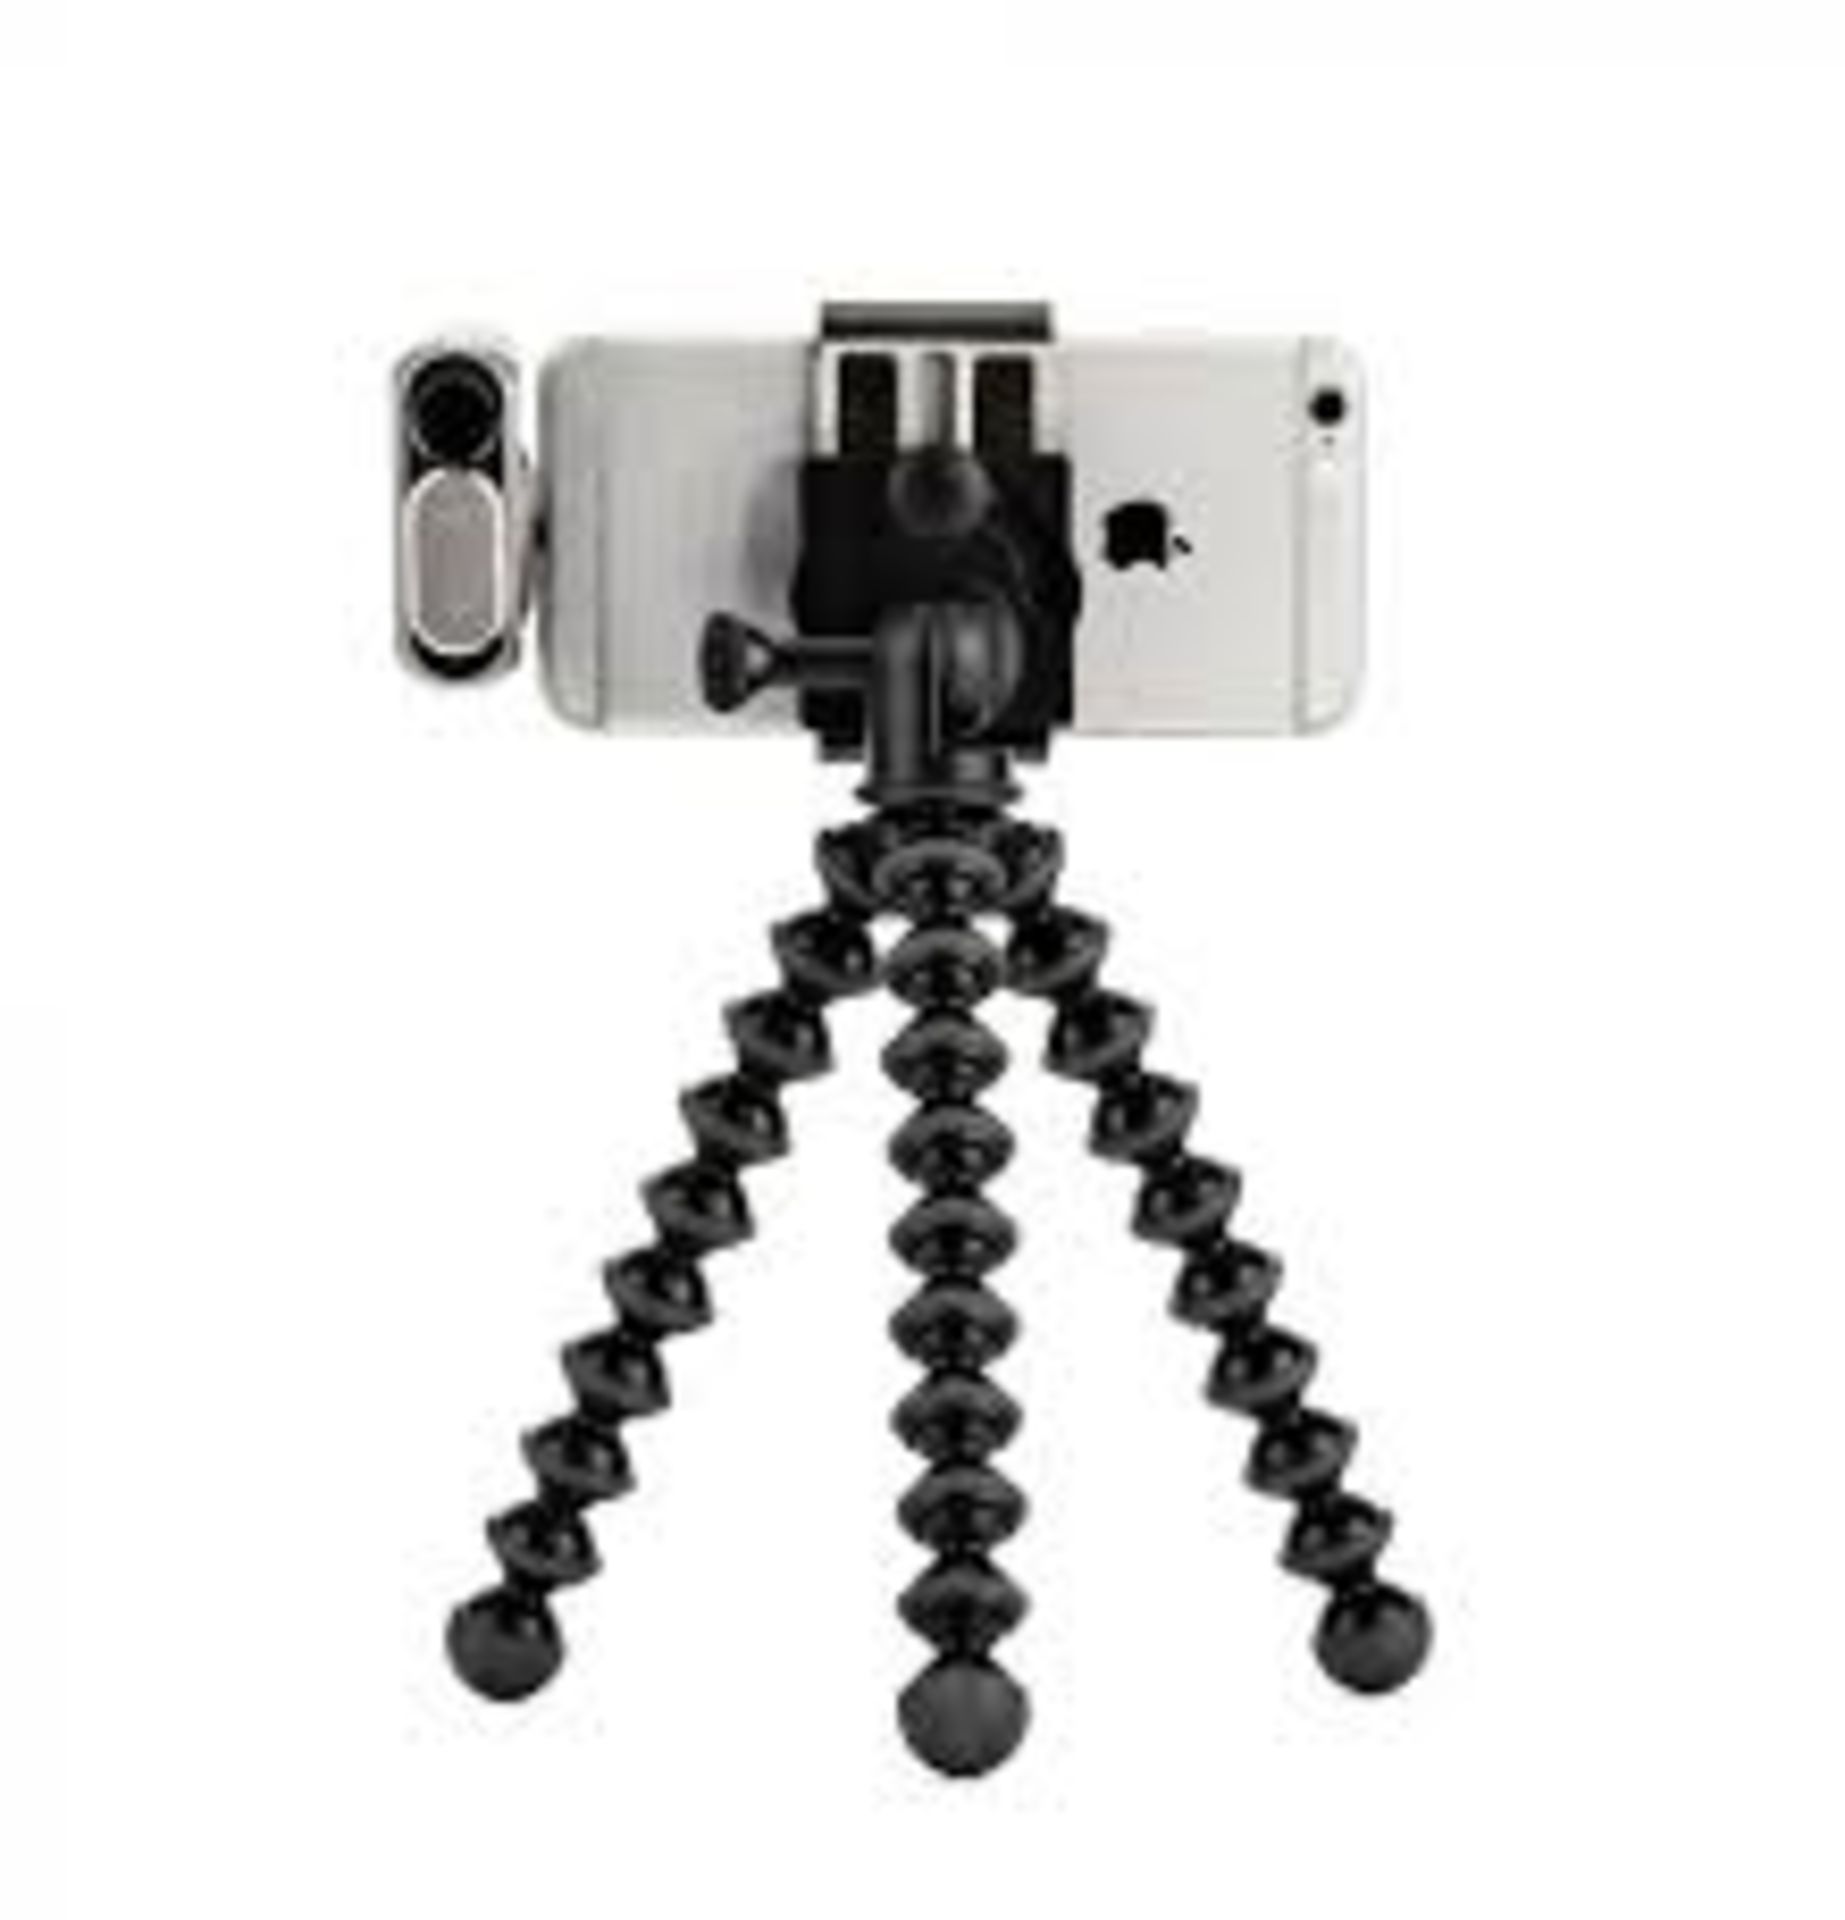 Boxed Brand New Joby Grip Tight Gorilla Pod Stand Pro For iPhone RRP £50